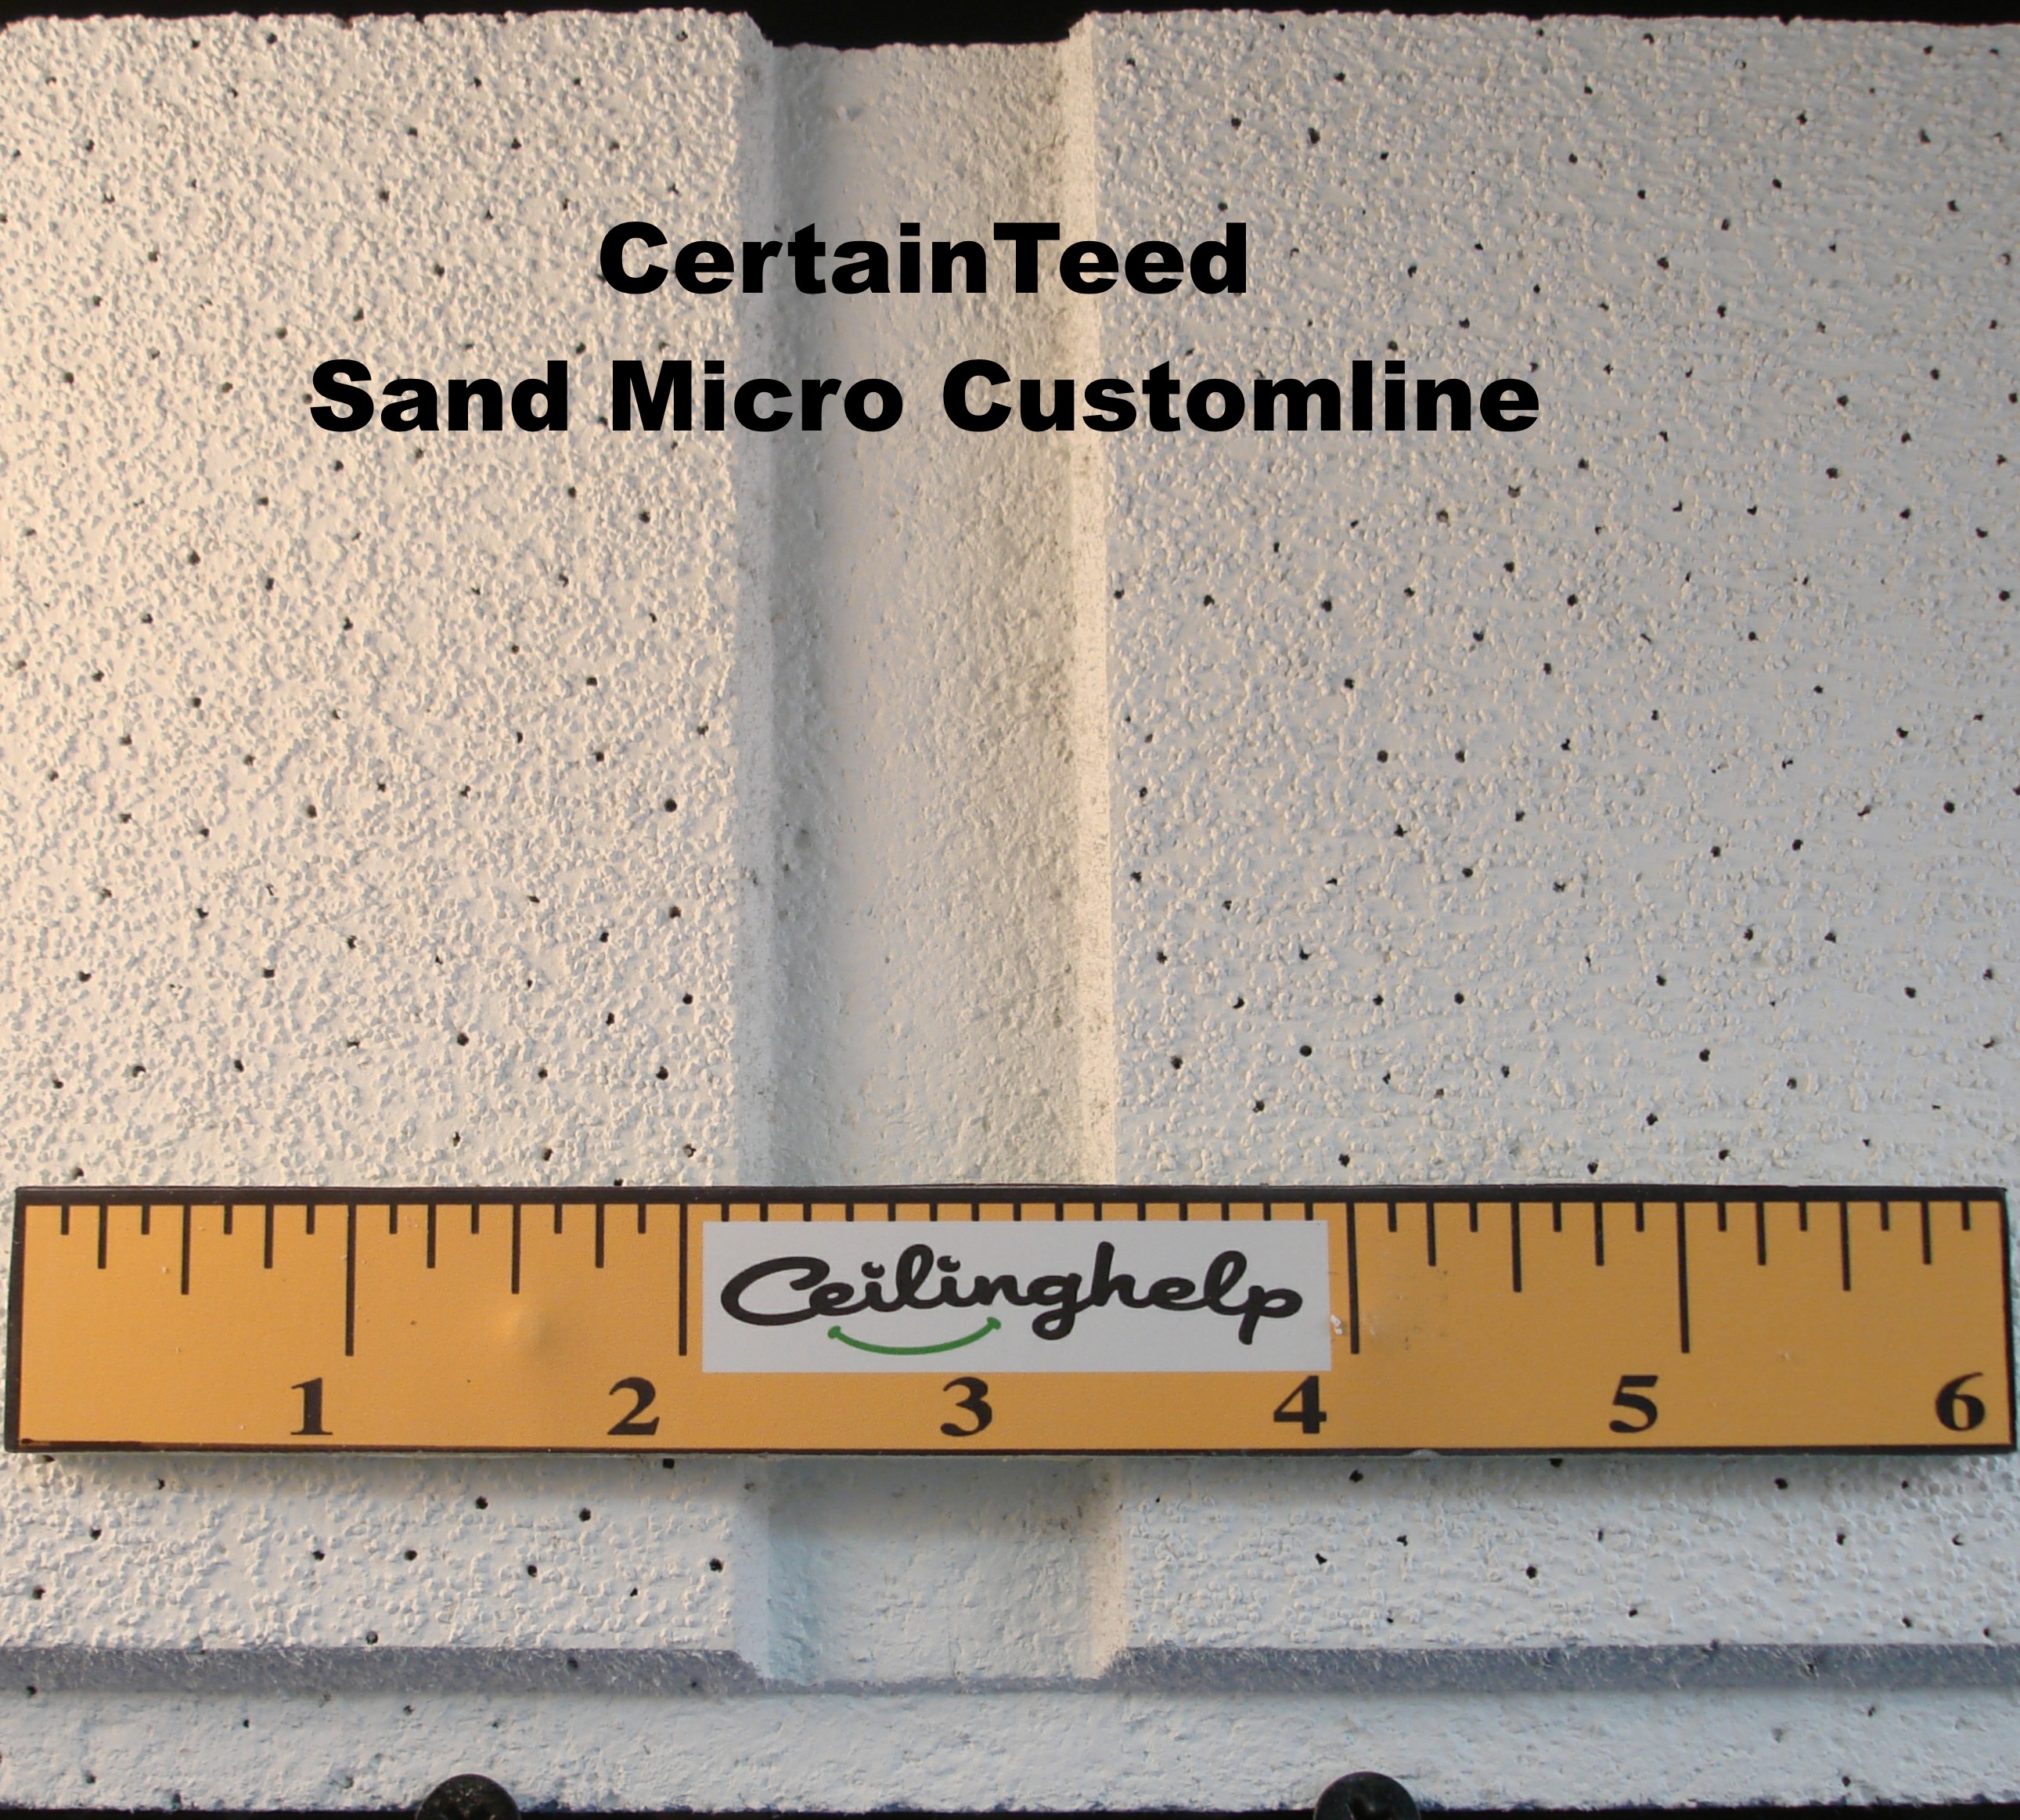 Certainteed Ceiling Tile Cross Referencecertainteed sand micro at wwwceilinghelp ceiling help